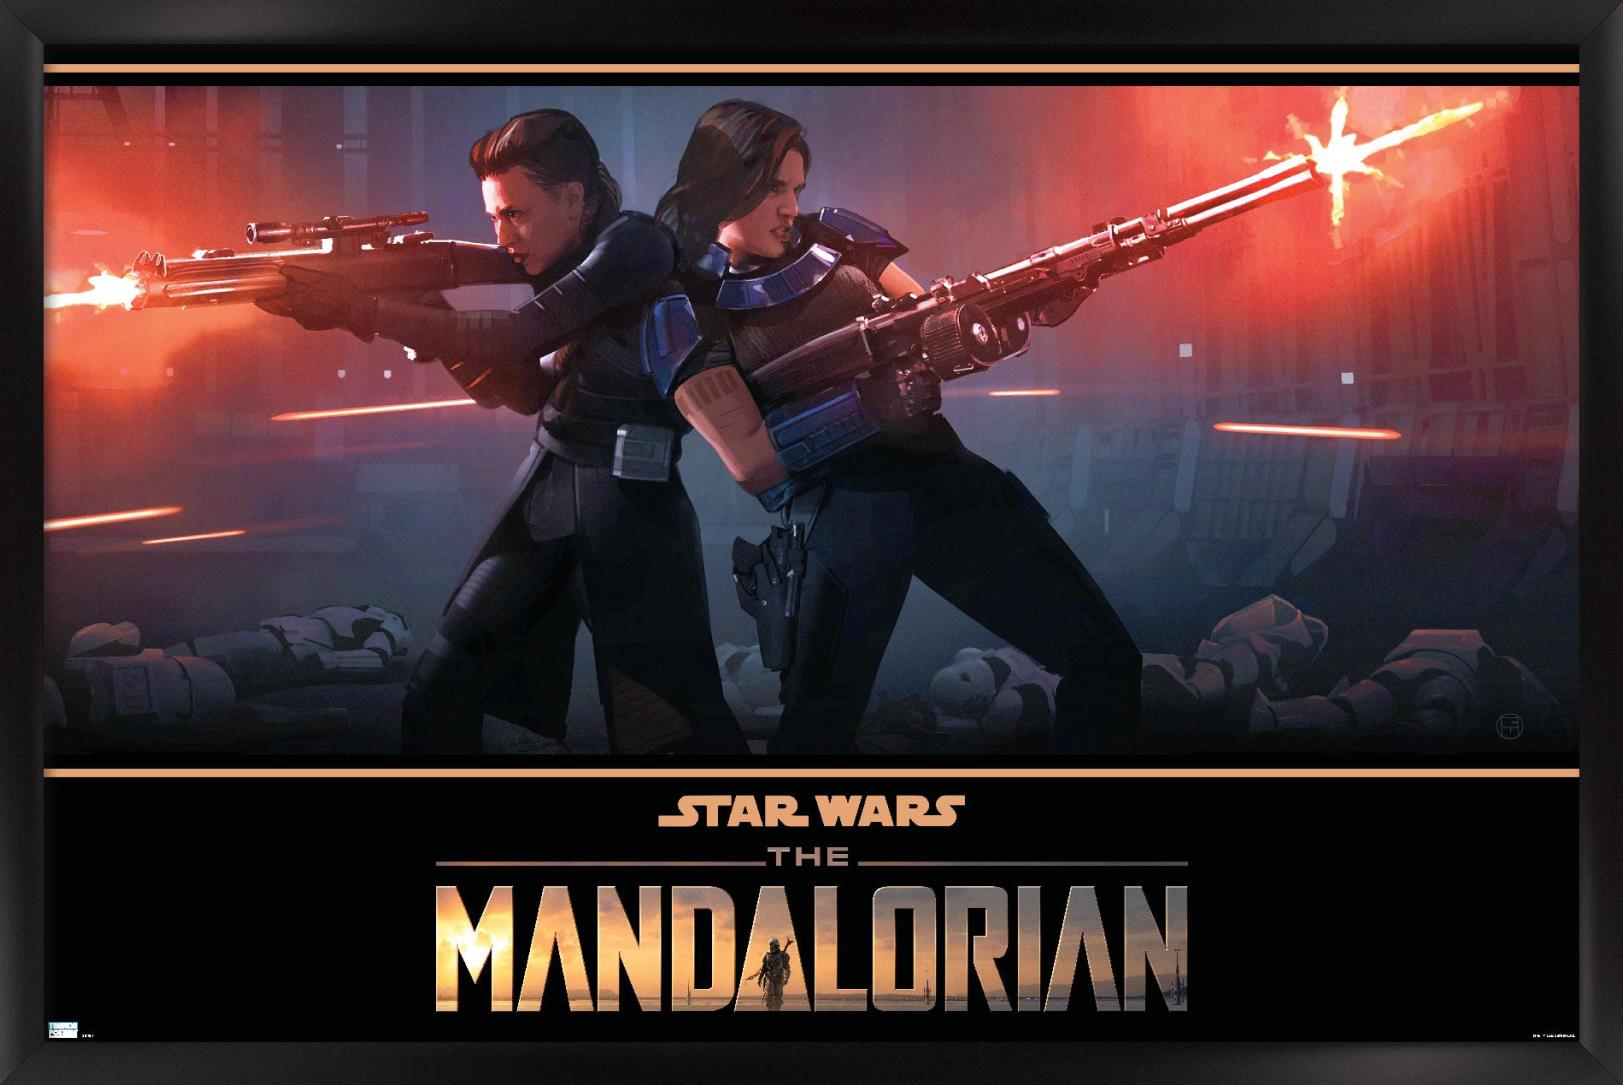 Star Wars: The Mandalorian Season 2 - Back to Back Wall Poster, 14.725" x 22.375", Framed - image 1 of 5